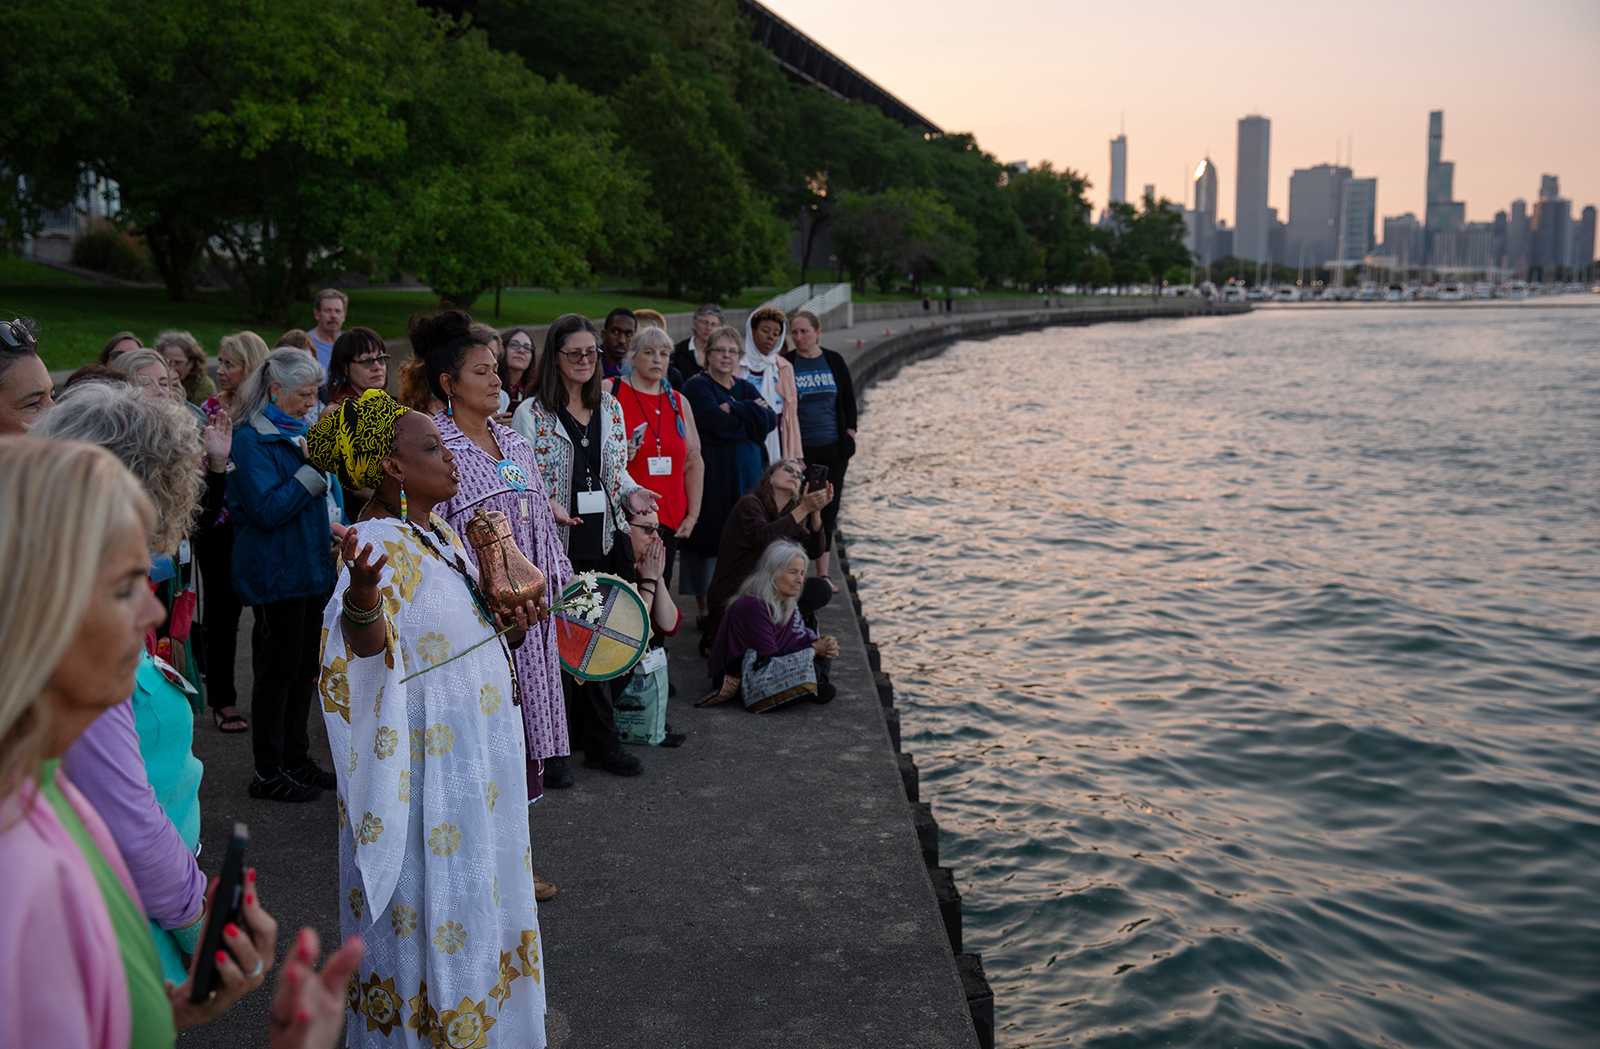 Yoruba priestess Aina-Nia leads a water ceremony by Lake Michigan as part of the Parliament of the World's Religions in Chicago on August 15, 2023. During the ceremony, which recognized the sacredness of water, water from different parts of the world was combined and poured into the lake. Photo by Lauren Pond for RNS